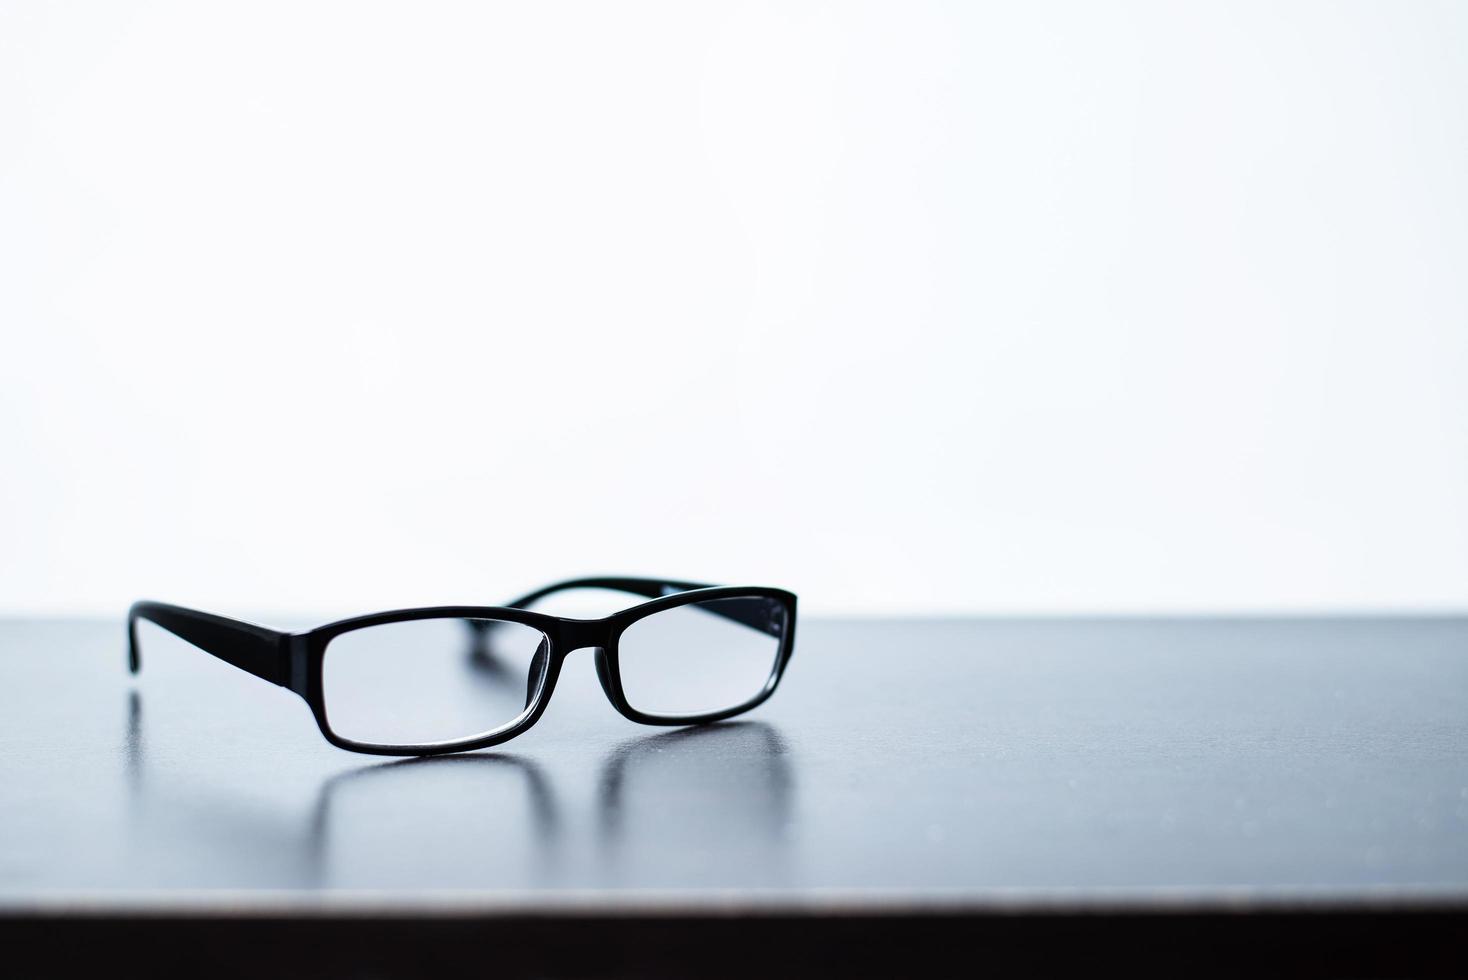 Glasses placed on the desk with white background photo